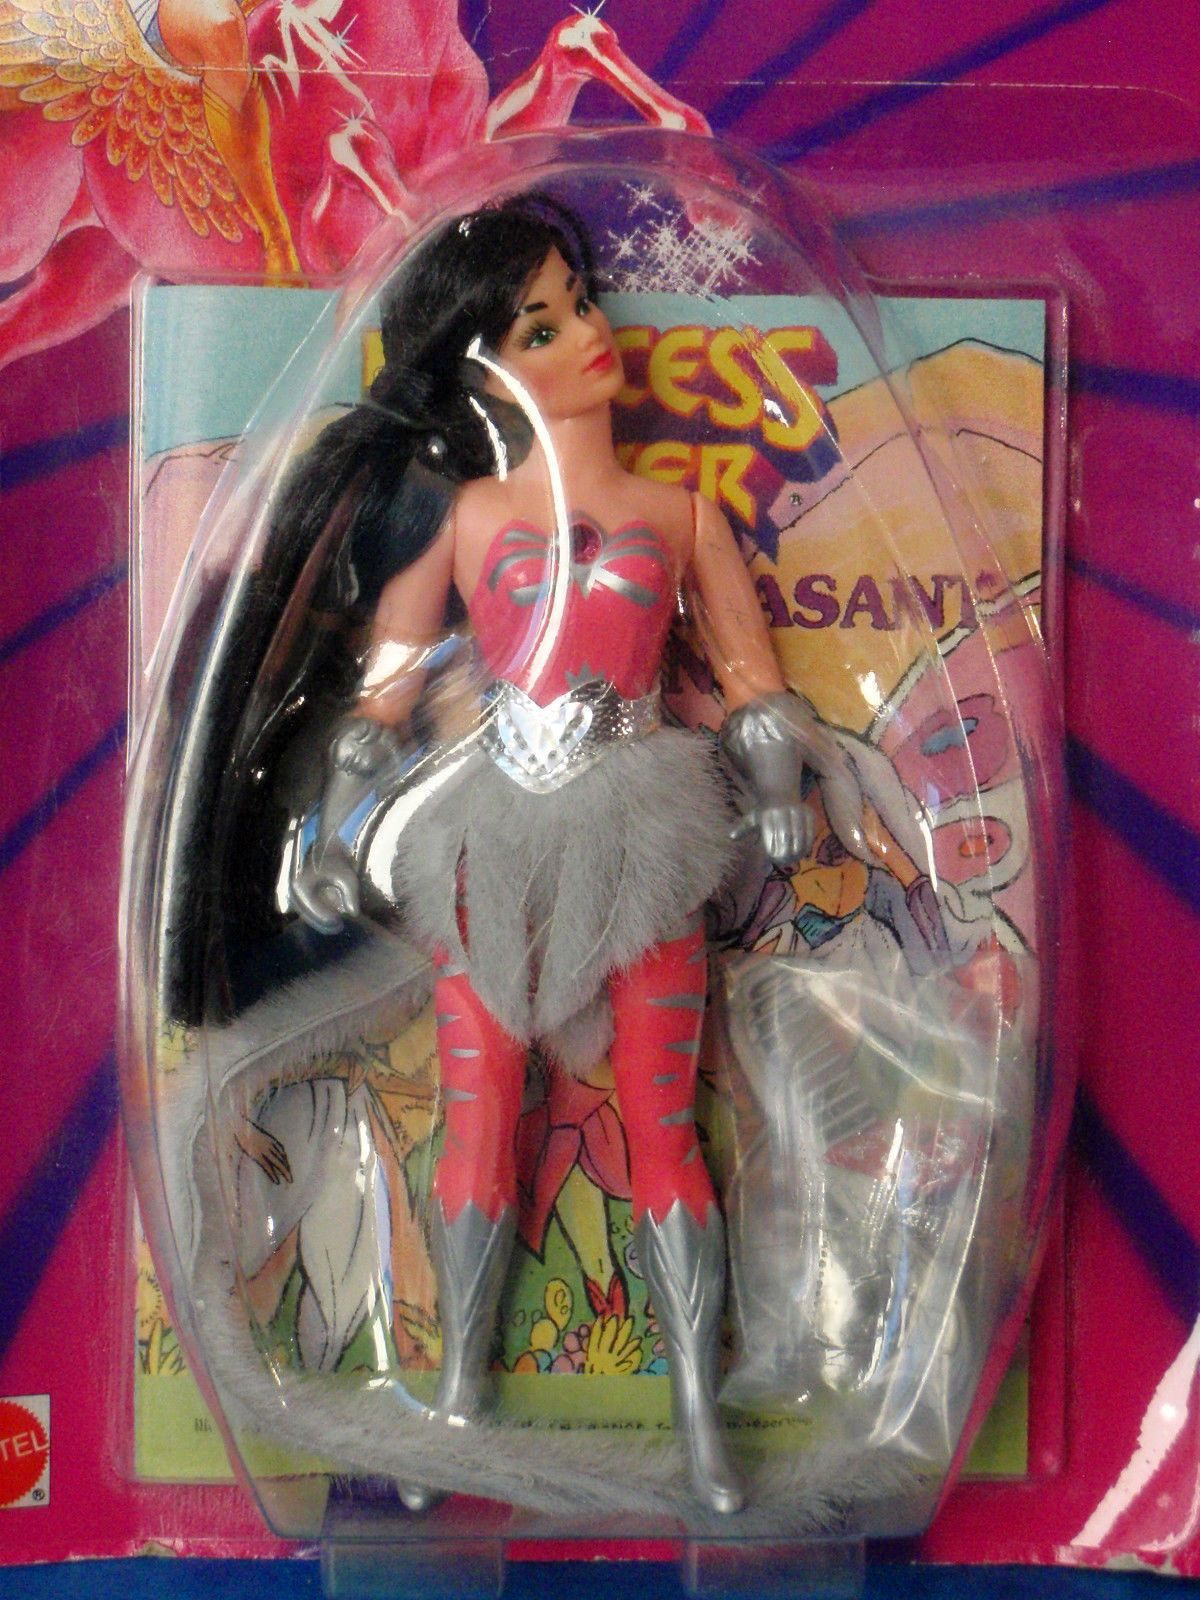 She-Ra: Princess of Power (1985) - (figures, dolls, toys and objects) 41